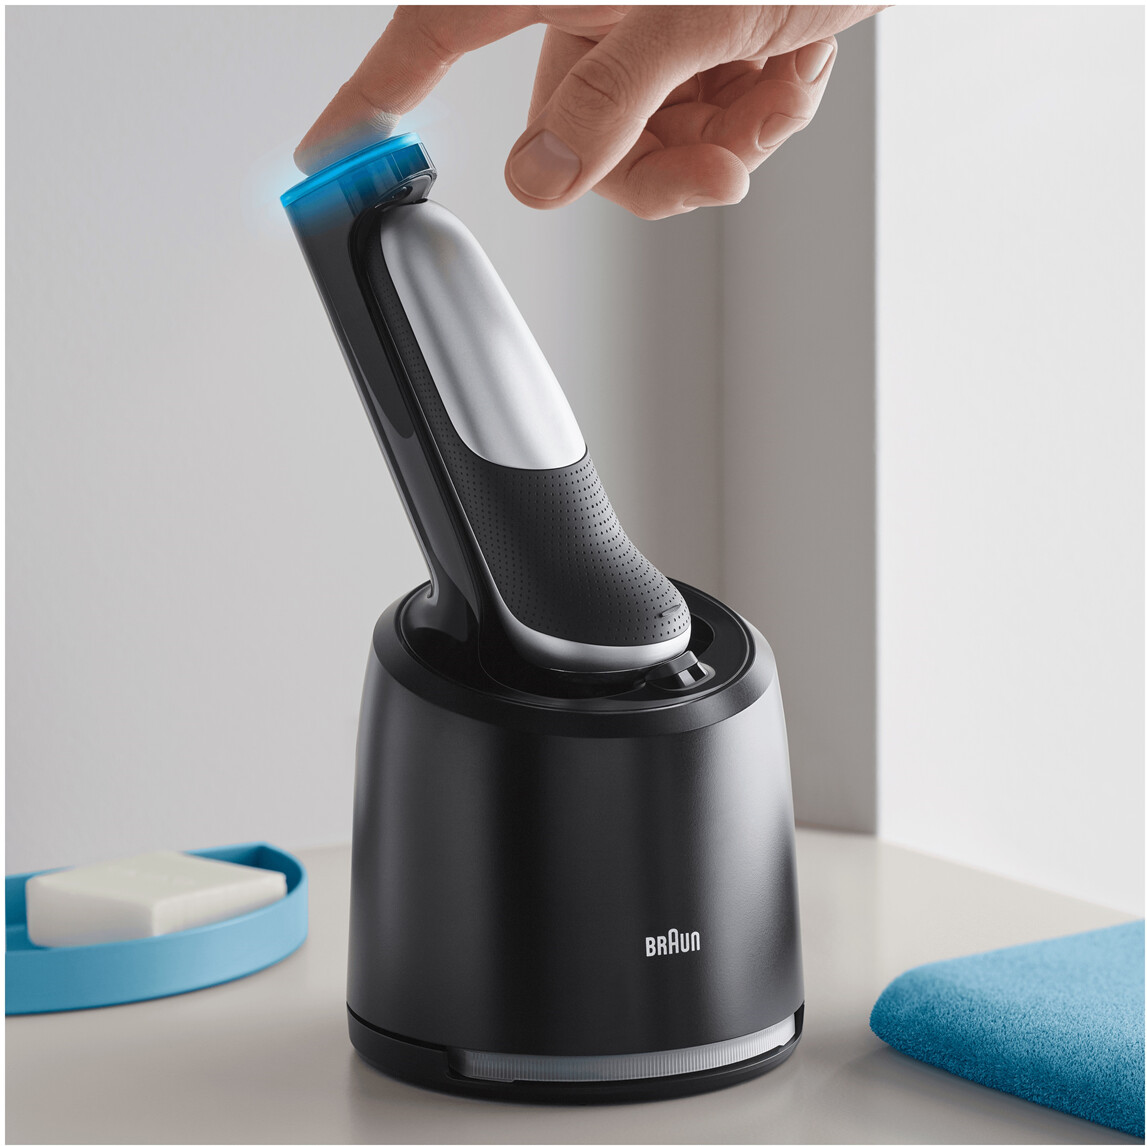 Braun Shaver Cleaning Solution Series 5-6-7 desde 37,00 €